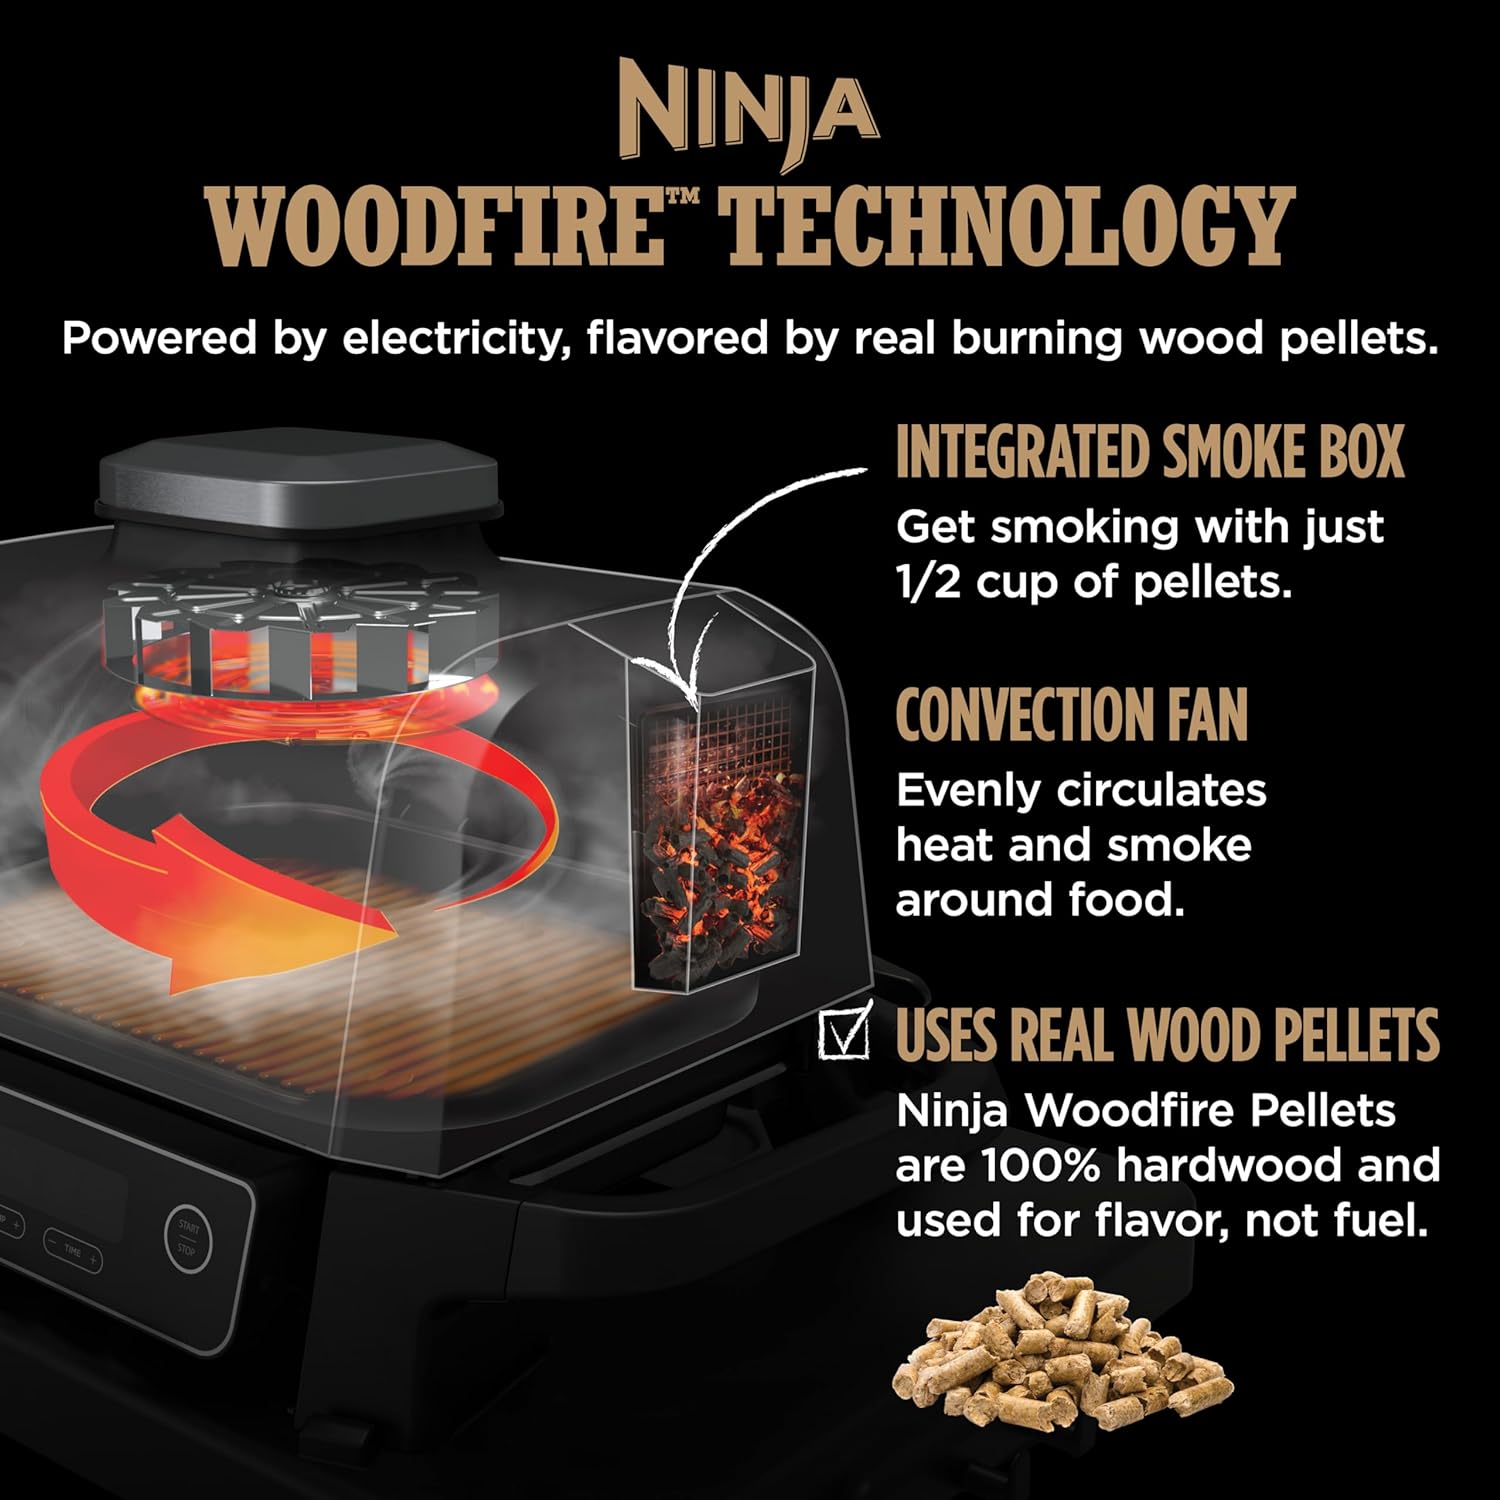 Ninja Woodfire Pro 7-in-1 Grill  Smoker with Thermometer, Air Fryer, BBQ, Bake, Roast, Broil - Portable Electric Outdoor Grill, Grey - Ninja Woodfire Pro 7-in-1 Grill & Smoker With Thermometer Review